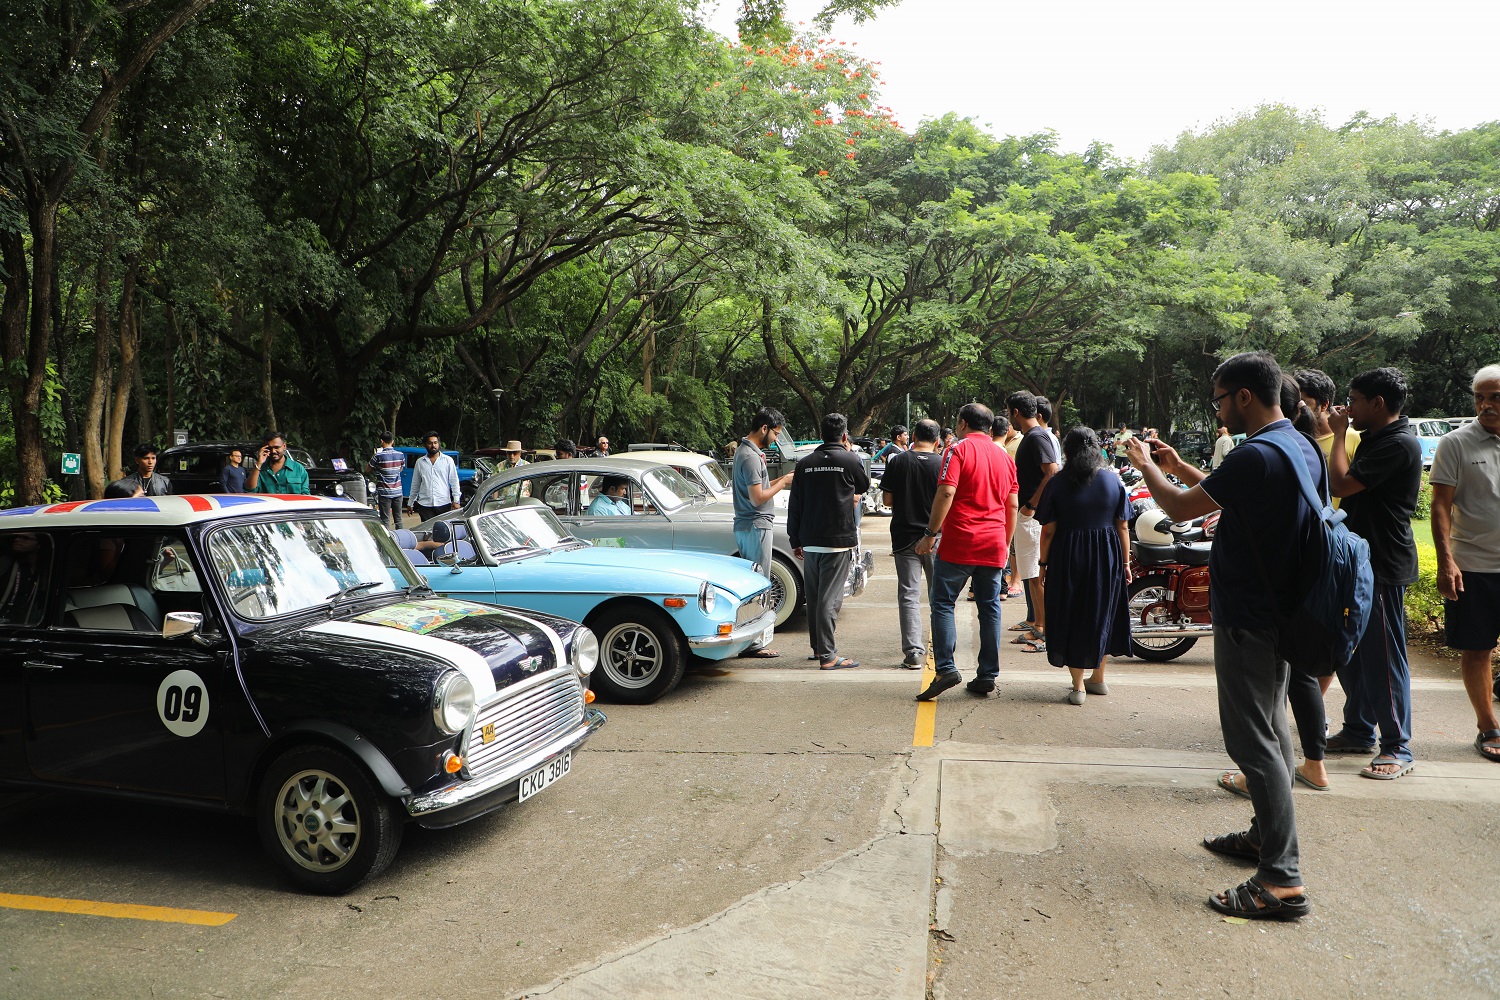 A vintage car ‘Drive for Wildlife Conservation’ took place in Bangalore on 1st October 23. The IIMB community enjoyed the exhibition as the rally took a break at IIMB enroute Bannerghatta National Park.